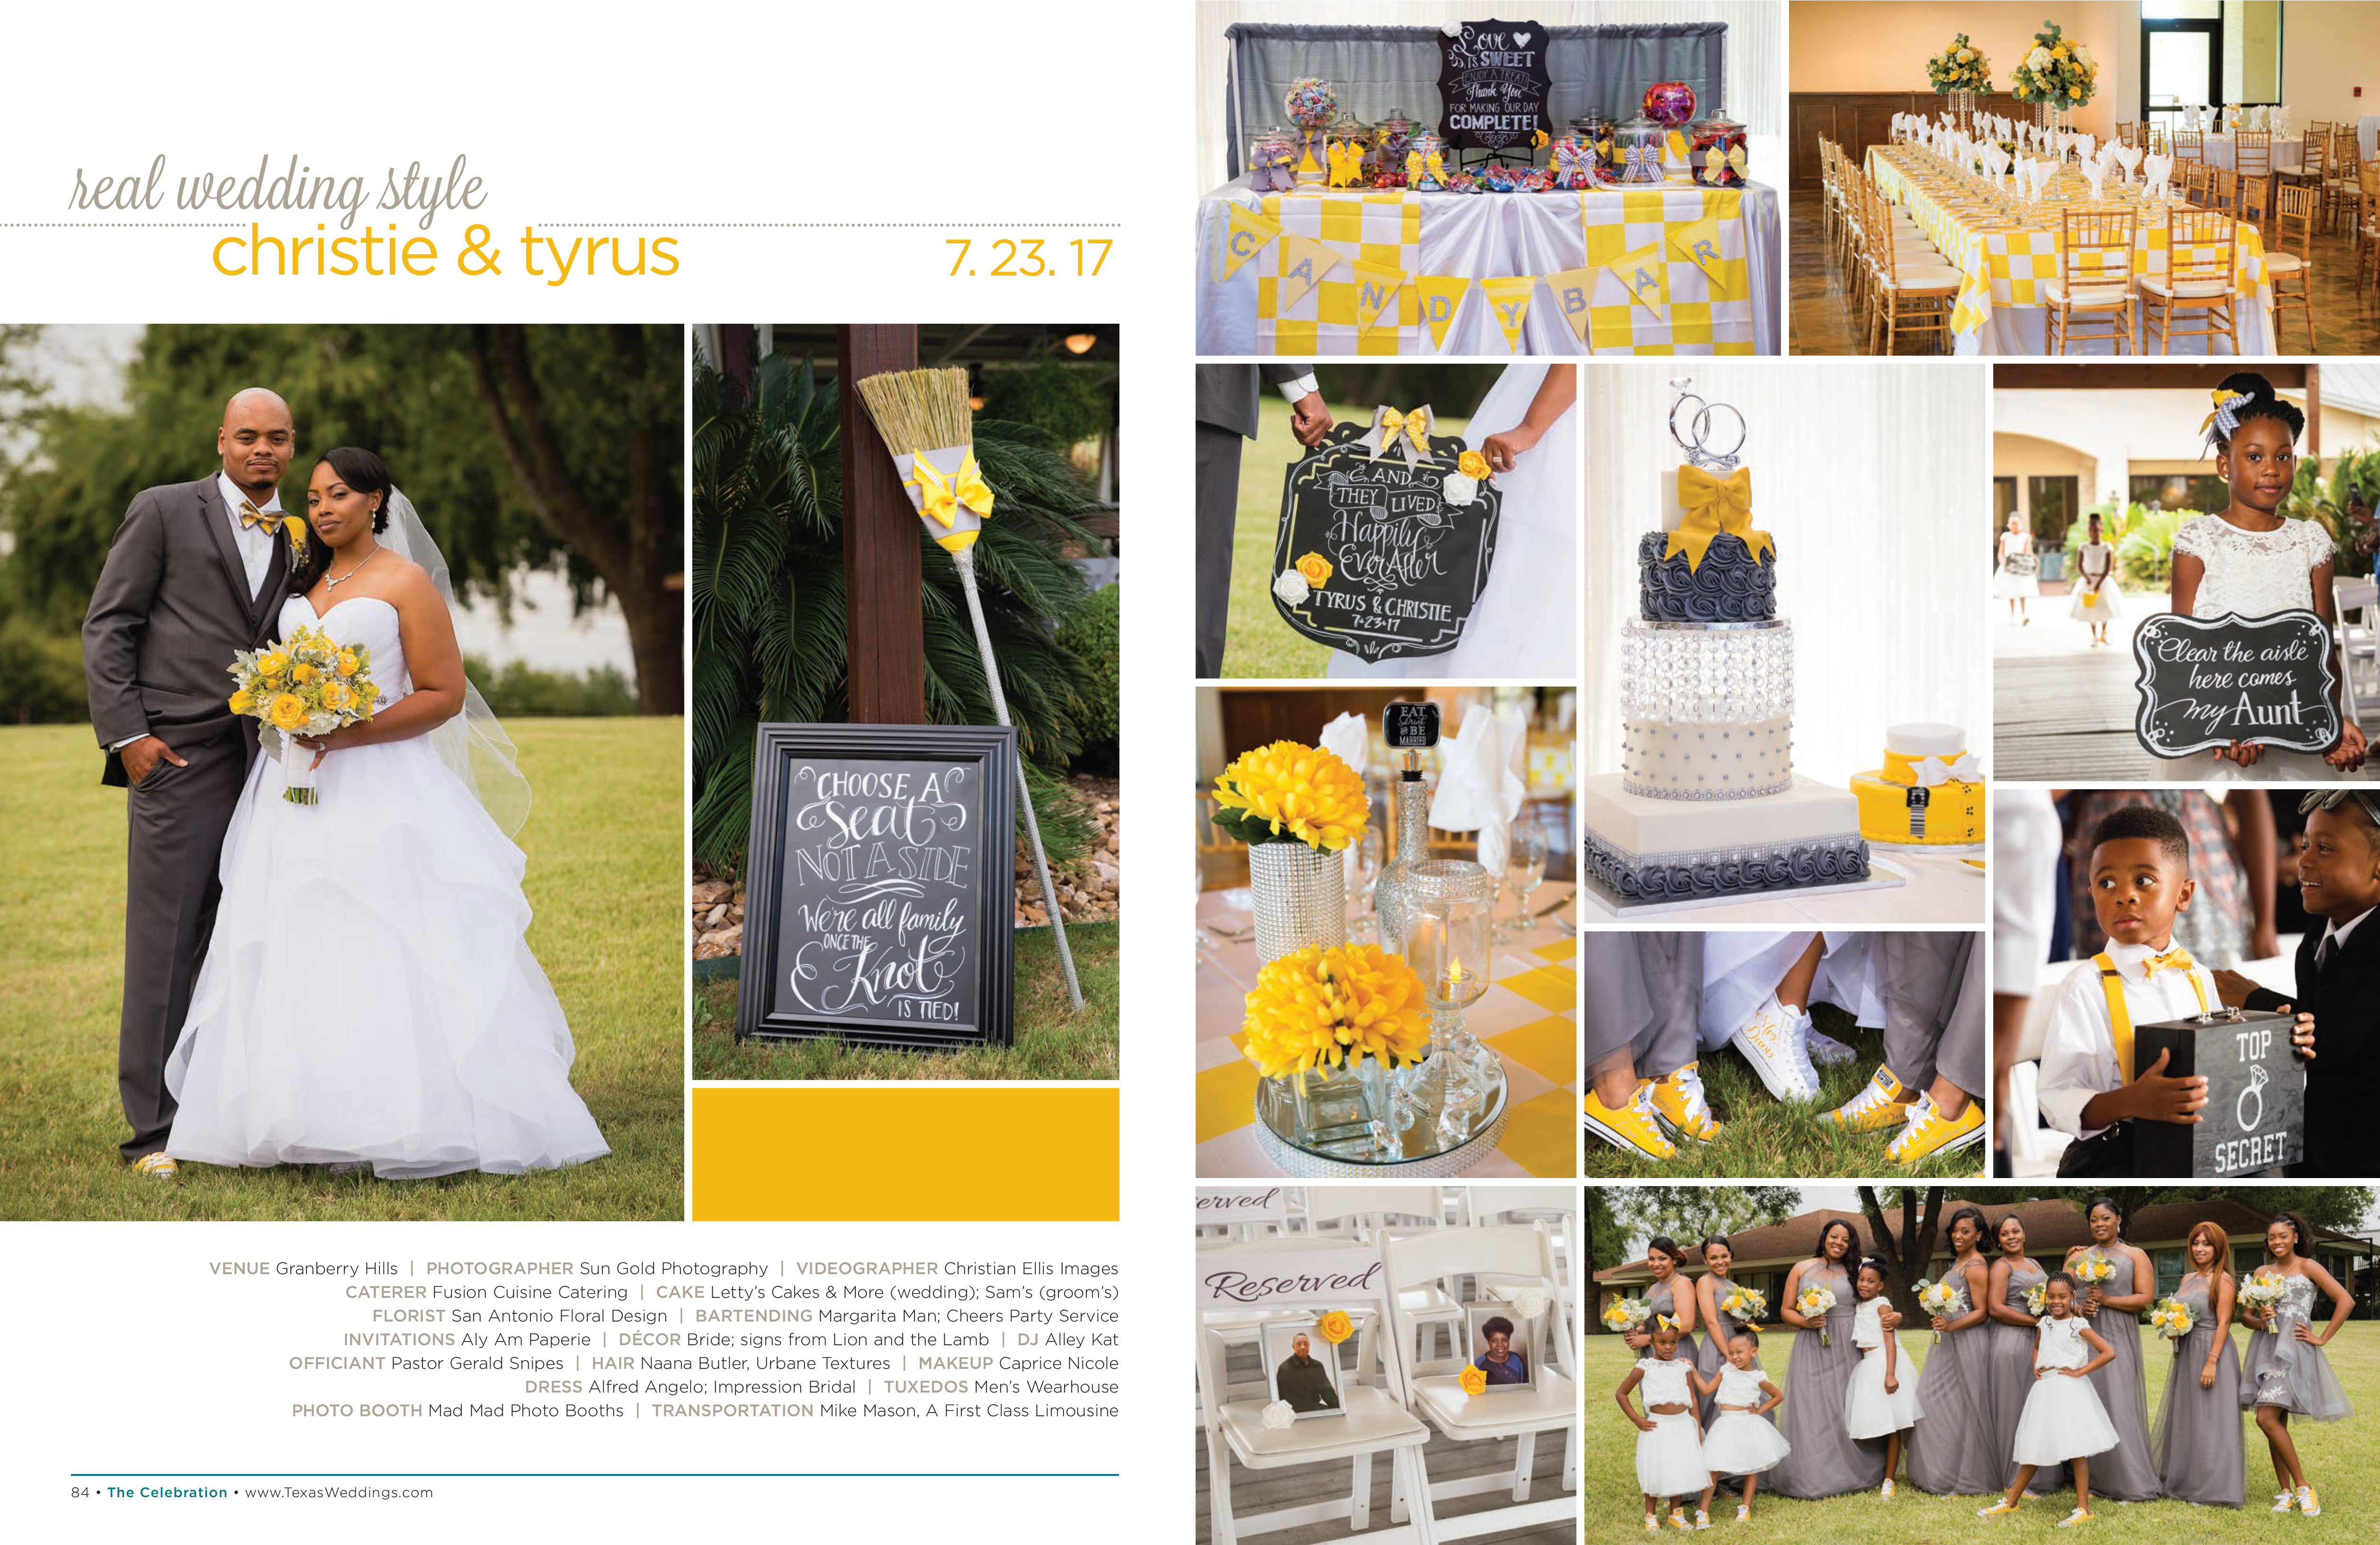 Christie & Tyrus in their Real Wedding Page in the Spring/Summer 2018 Texas Wedding Guide